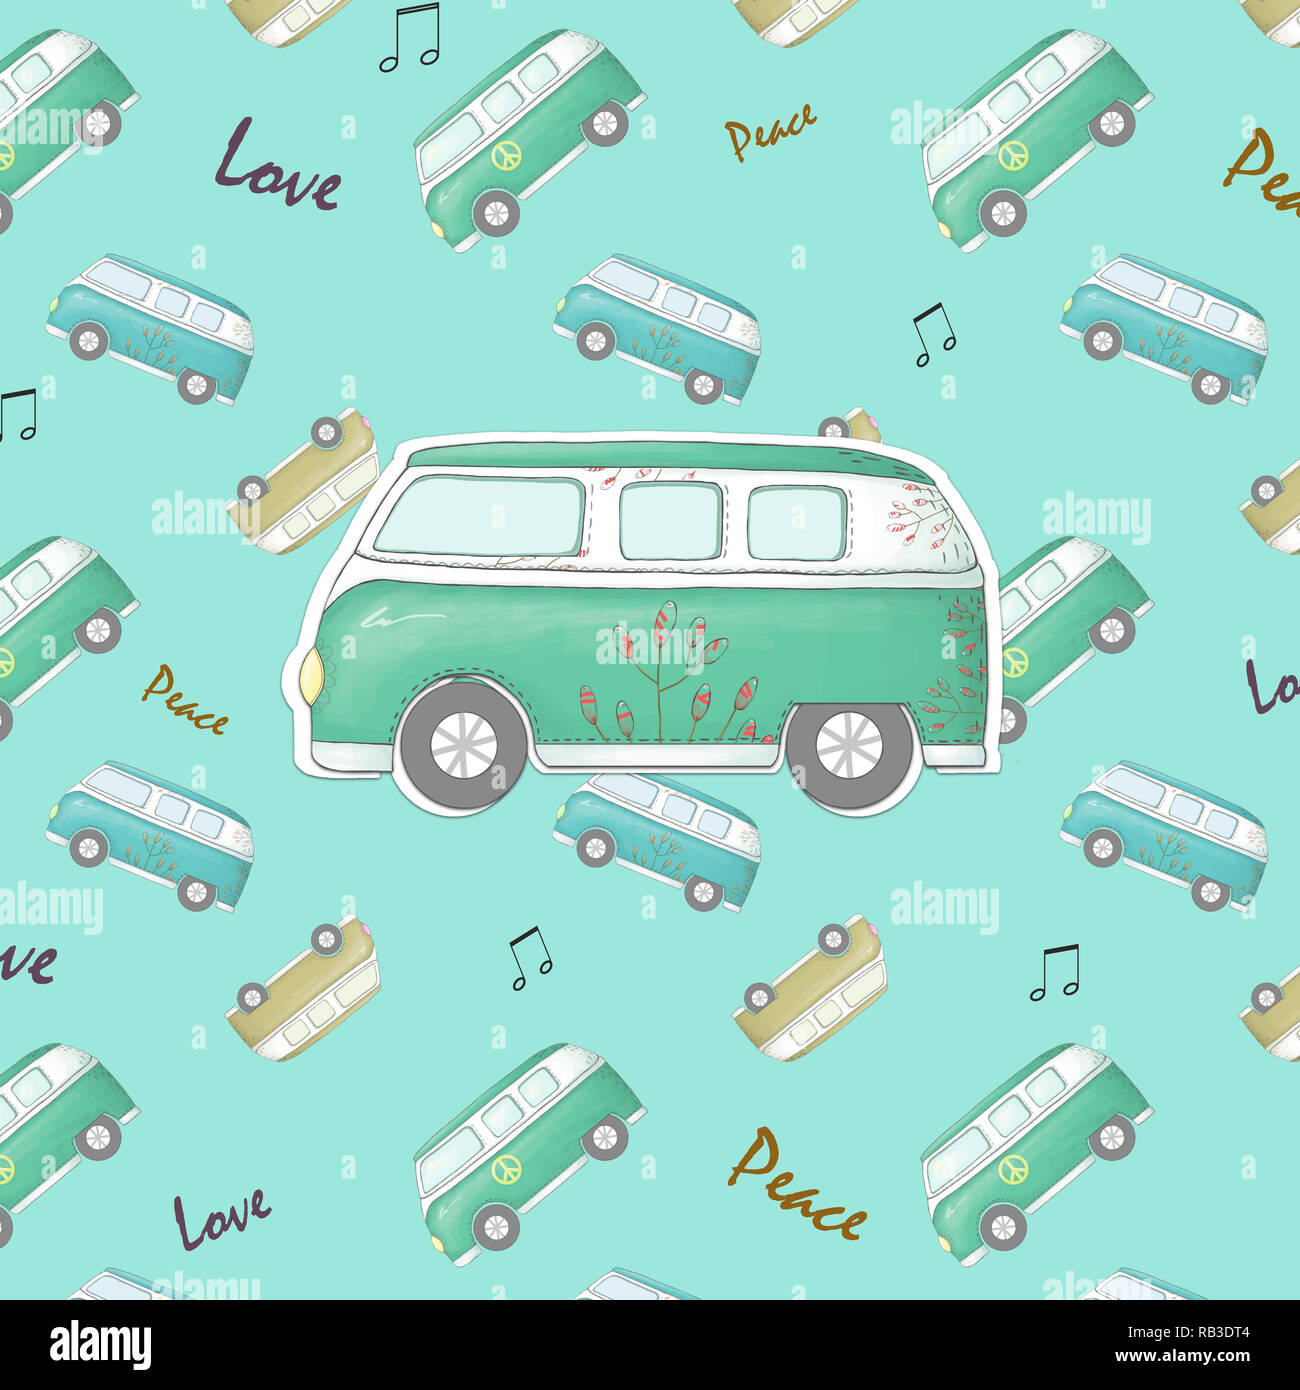 Hippie vintage car a mini van Ornate background Love and Music with hand-written fonts hand-drawn doodle background and textures Hippy color illustrat Stock Photo